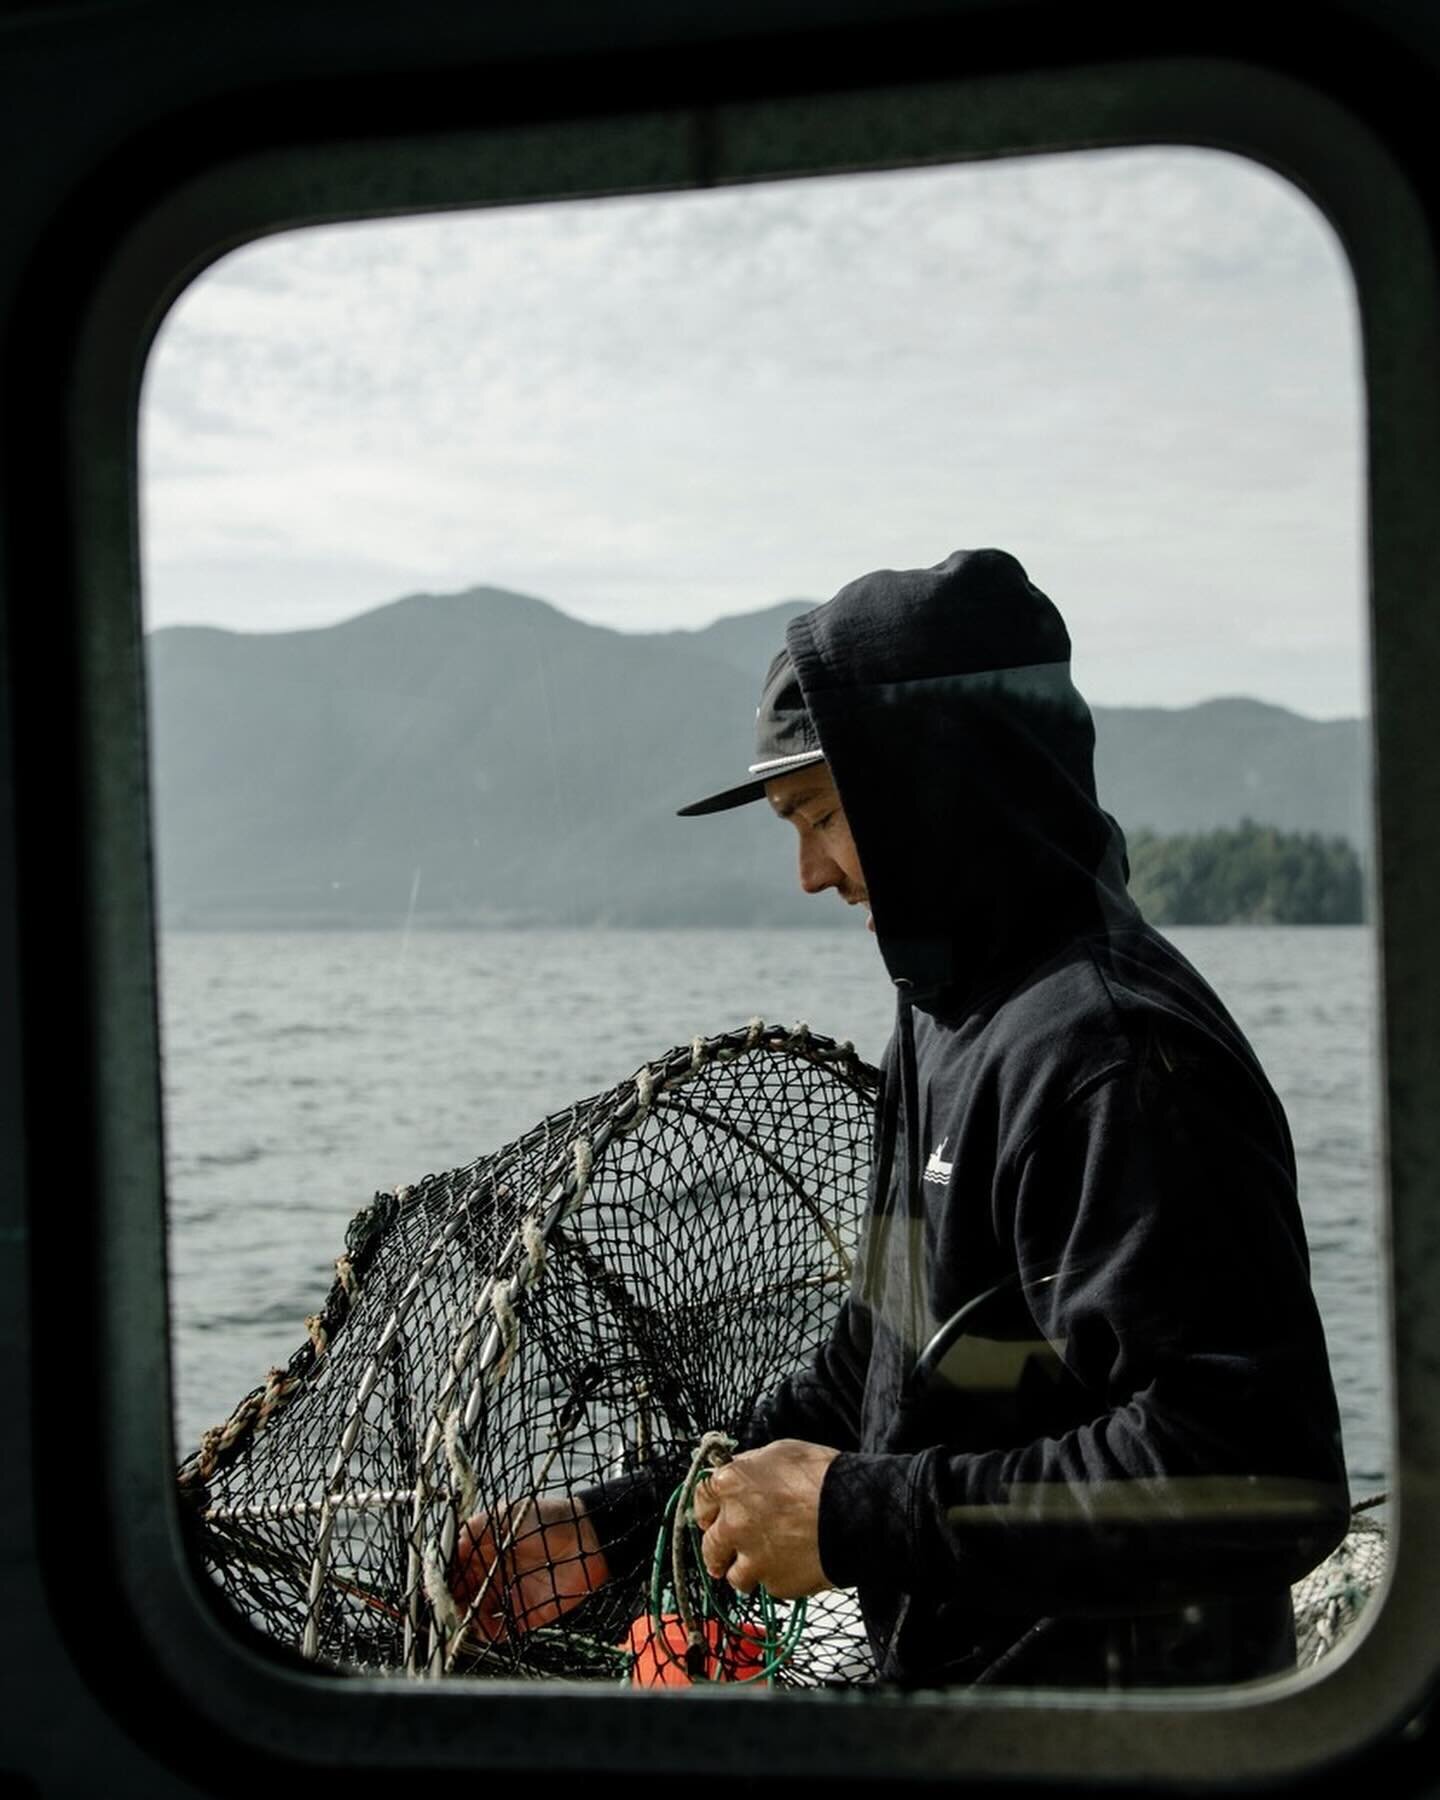 𝐌𝐚𝐫𝐜𝐡 𝐑𝐨𝐮𝐧𝐝𝐮𝐩! This month absolutely delivered starting with an incredible herring spawn right off of the docks in Tofino, with that came an abundance of wildlife and exceptional fishing. 
The offshore waters produced plenty of salmon and